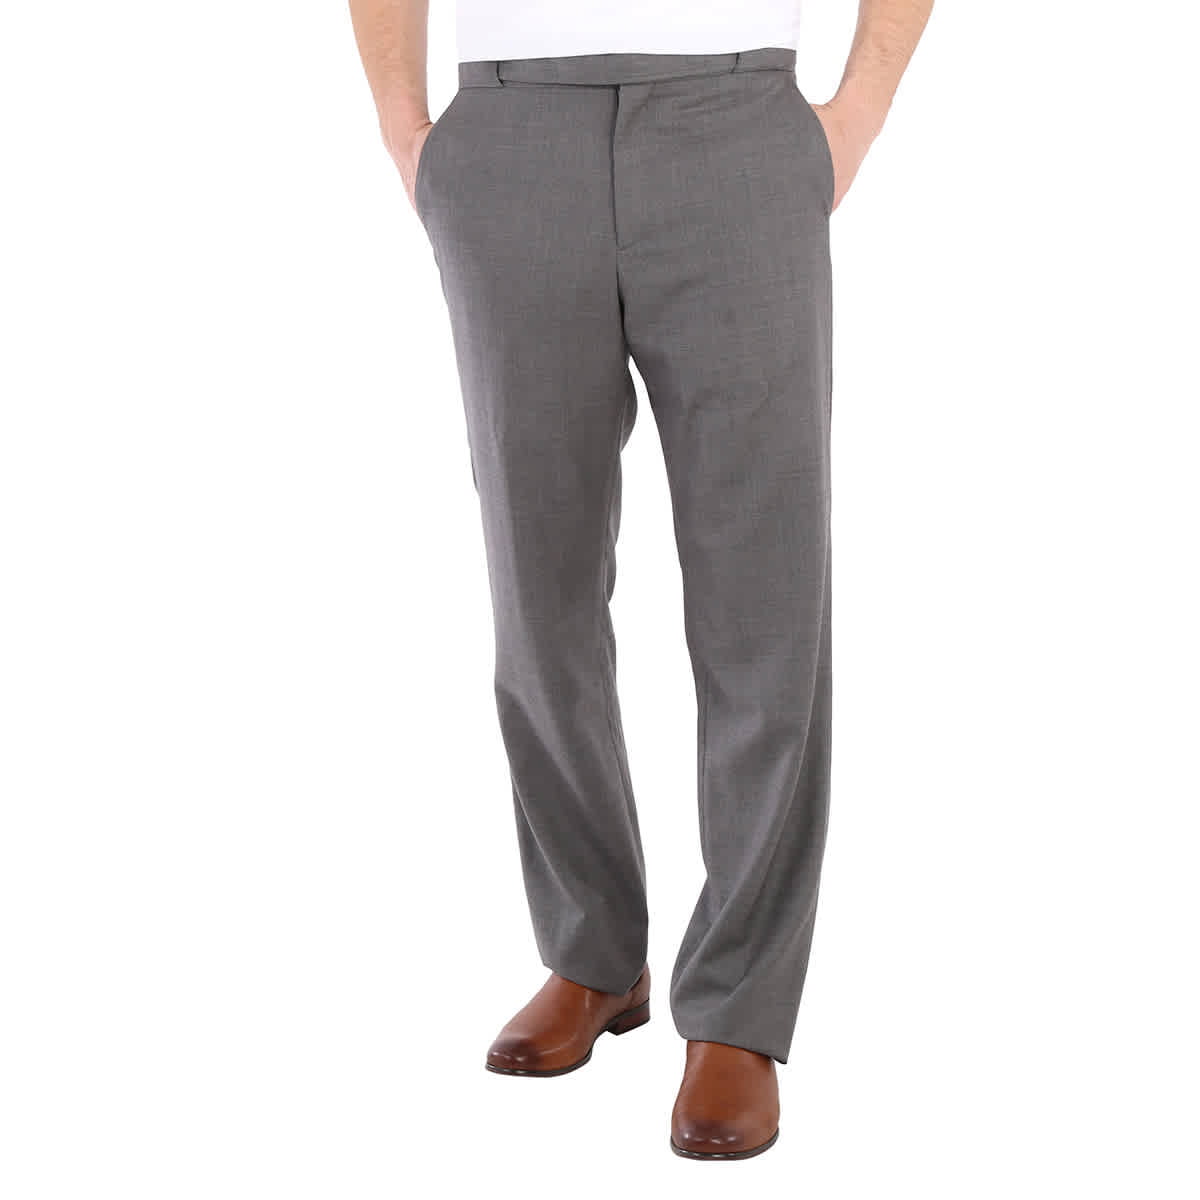 Jeans & Trousers | Charcoal Grey Formal Pants (Women's) | Freeup